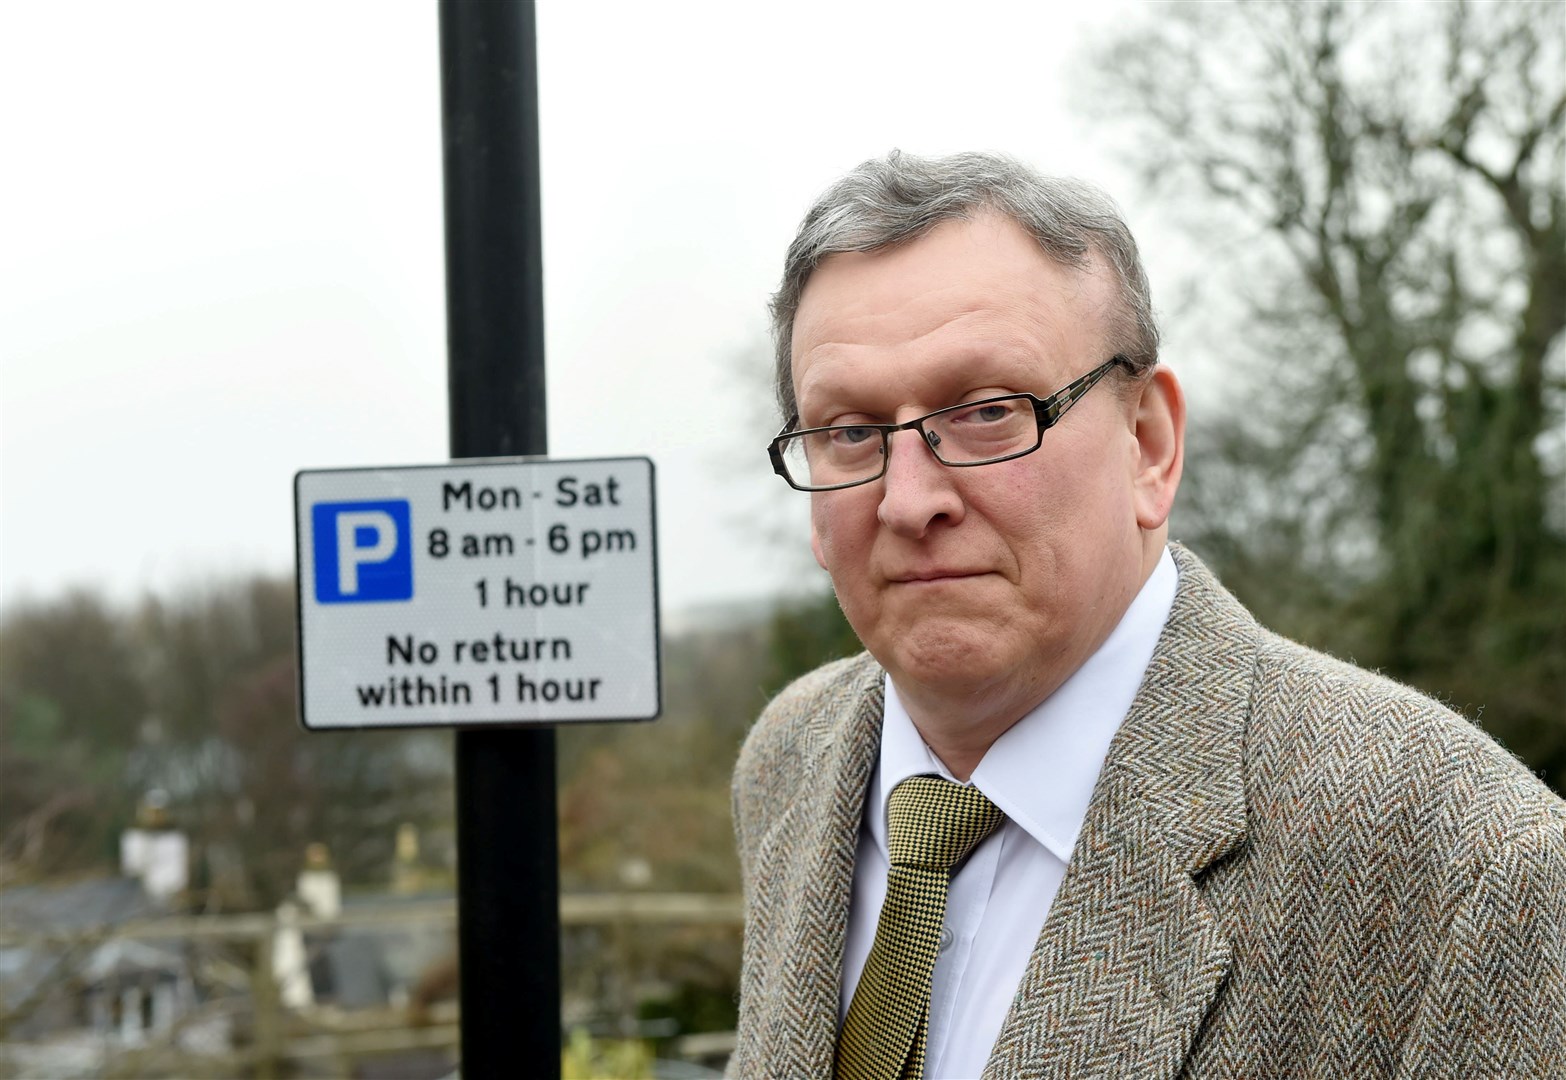 Councillor Derek Louden said recent safety measures could be revisited in future if there is evidence of continuing issues. Picture: Callum Mackay.